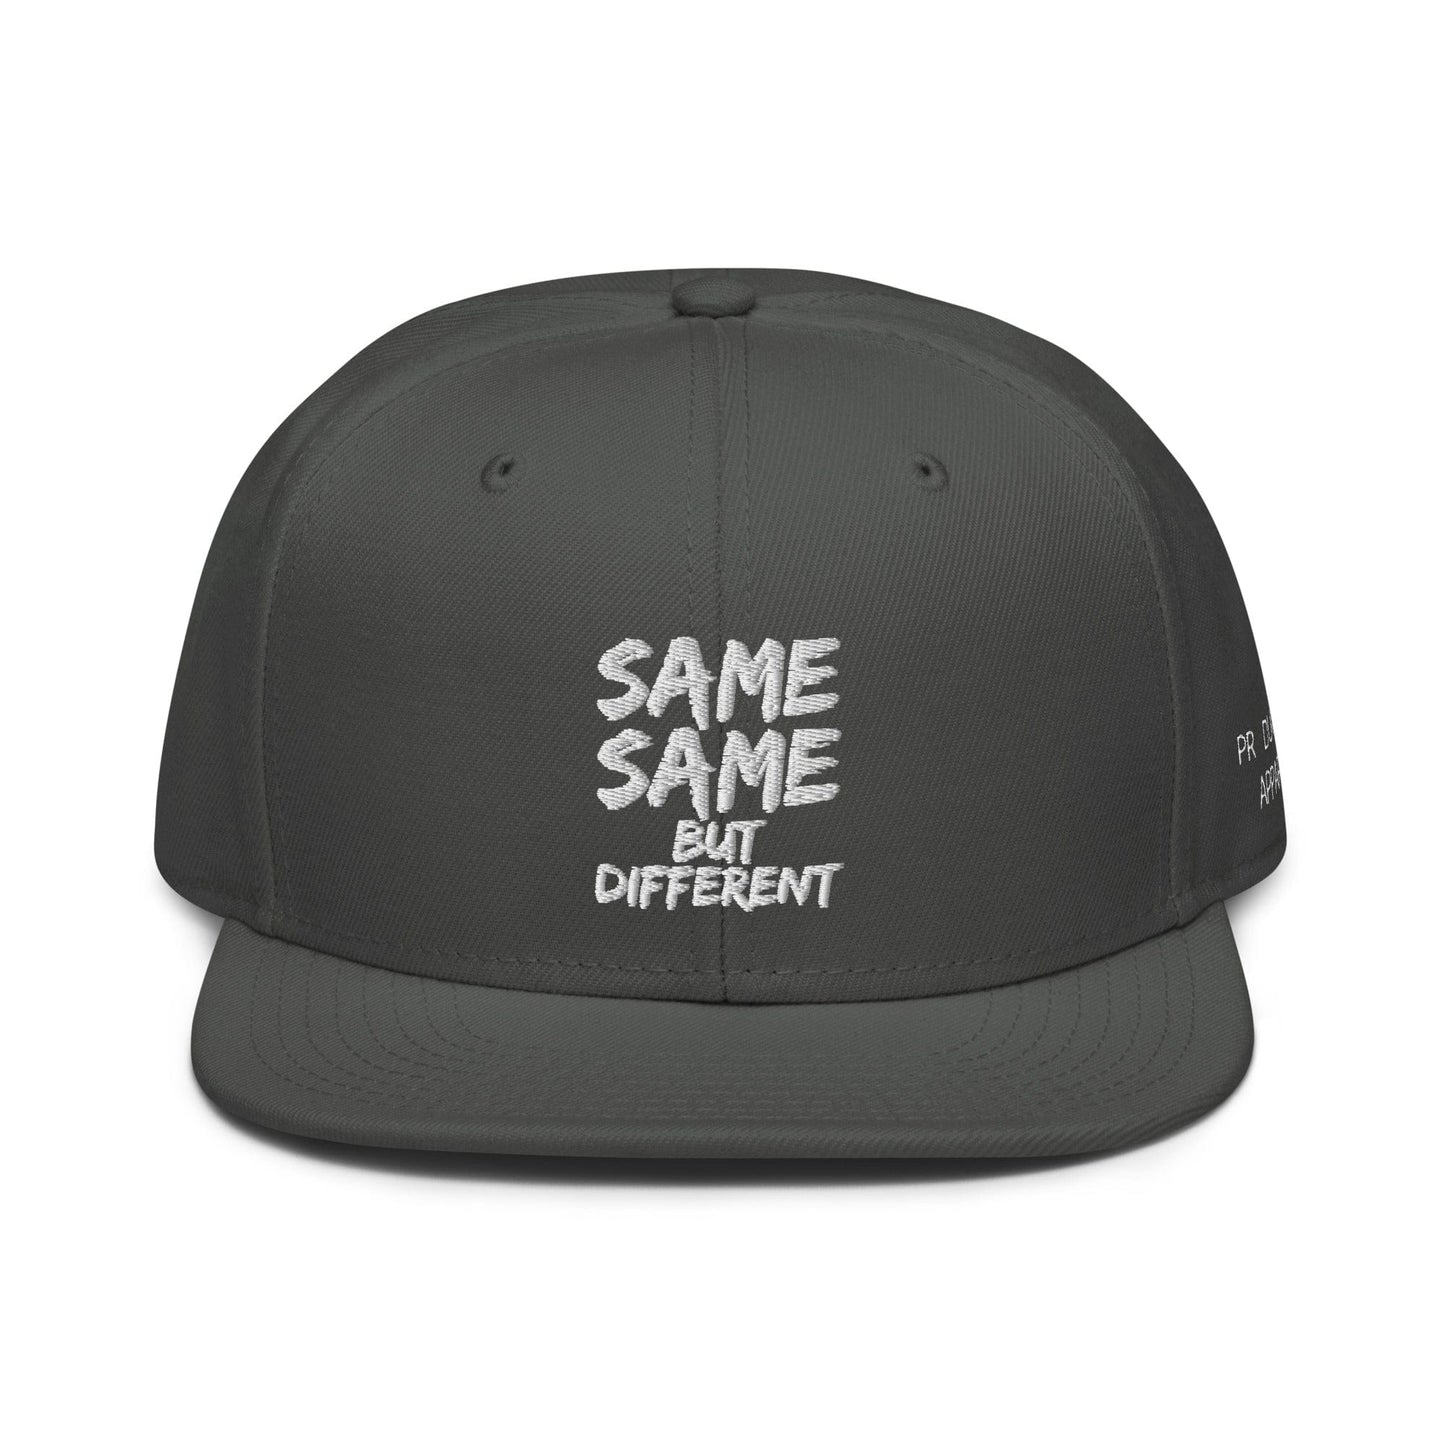 Production Apparel SAME SAME BUT DIFFERENT Hat Charcoal gray